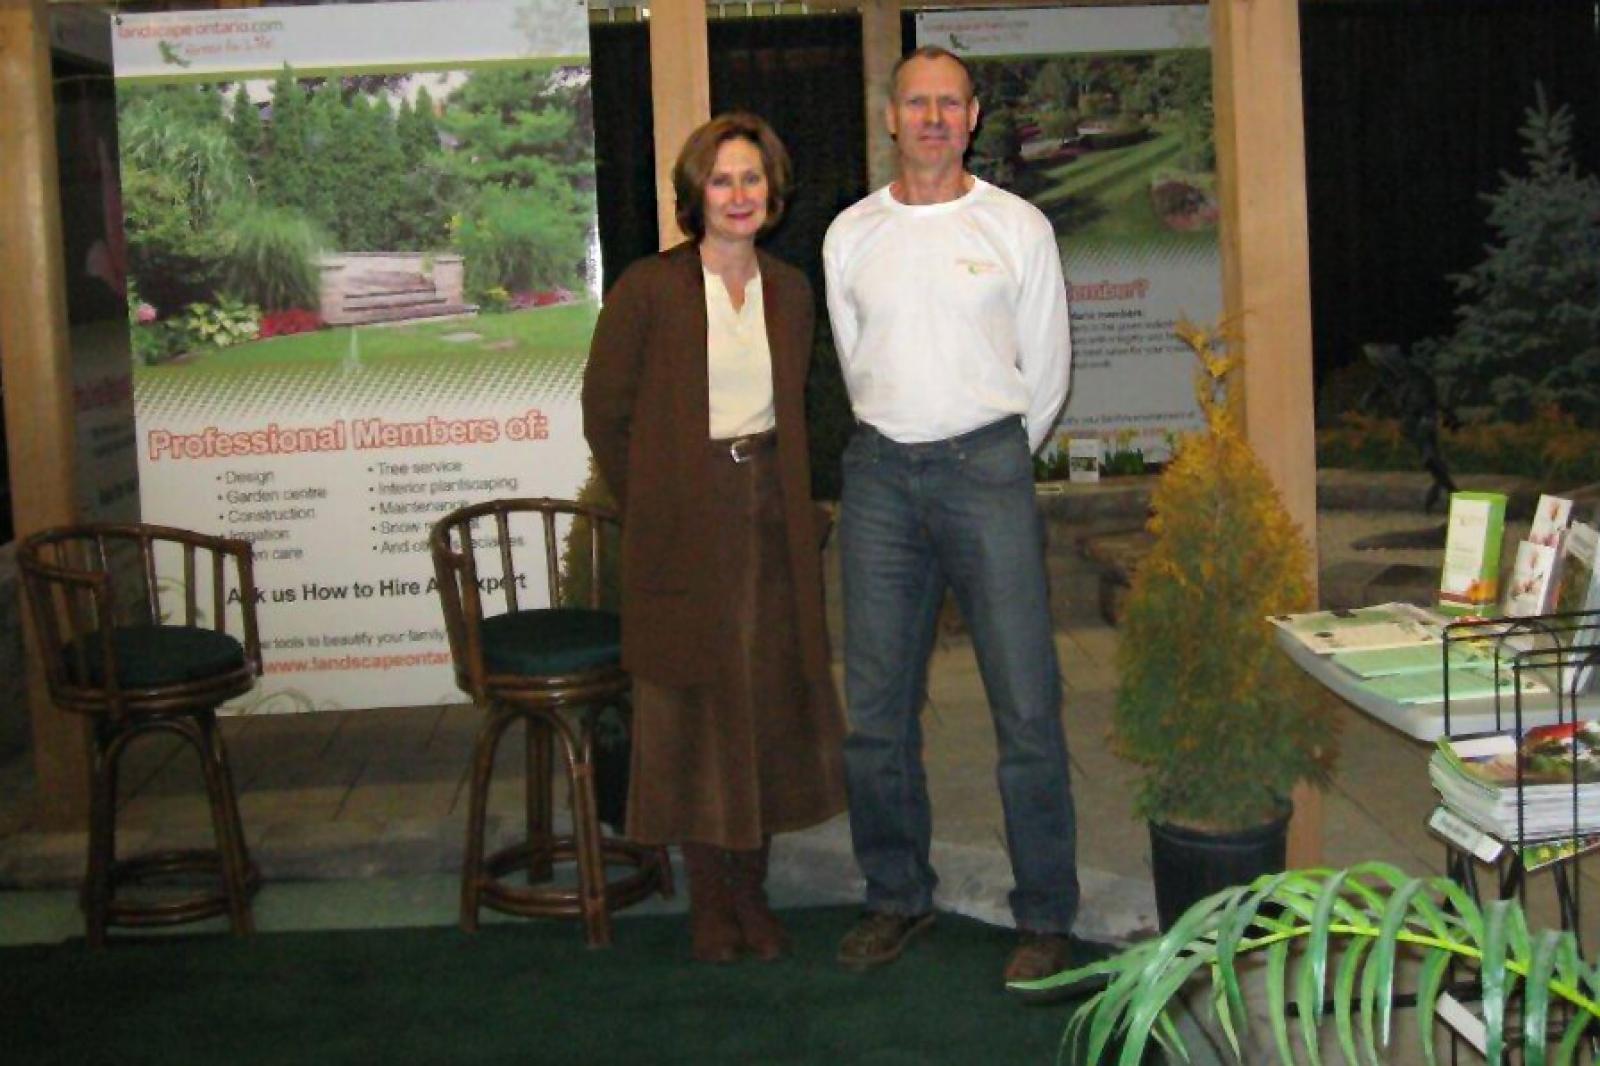 The London Chapter booth promoted LO members and the Chapter garden tour this July 9.